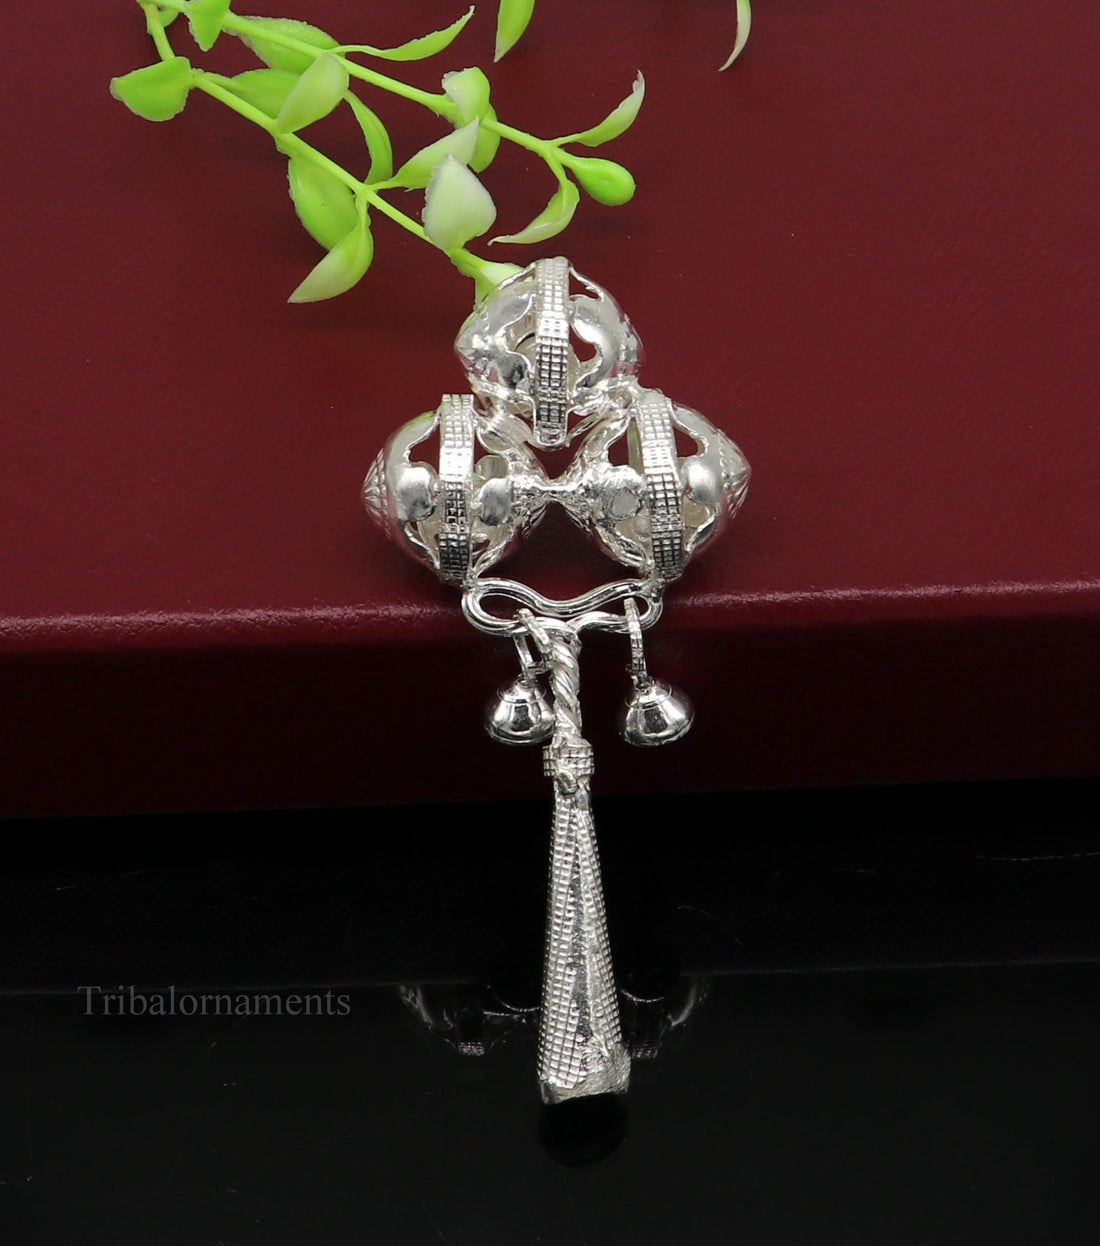 Solid sterling silver handmade design new born baby gifting bells toy, baby krishna gifting toy, silver whistle, silver temple article su408 - TRIBAL ORNAMENTS